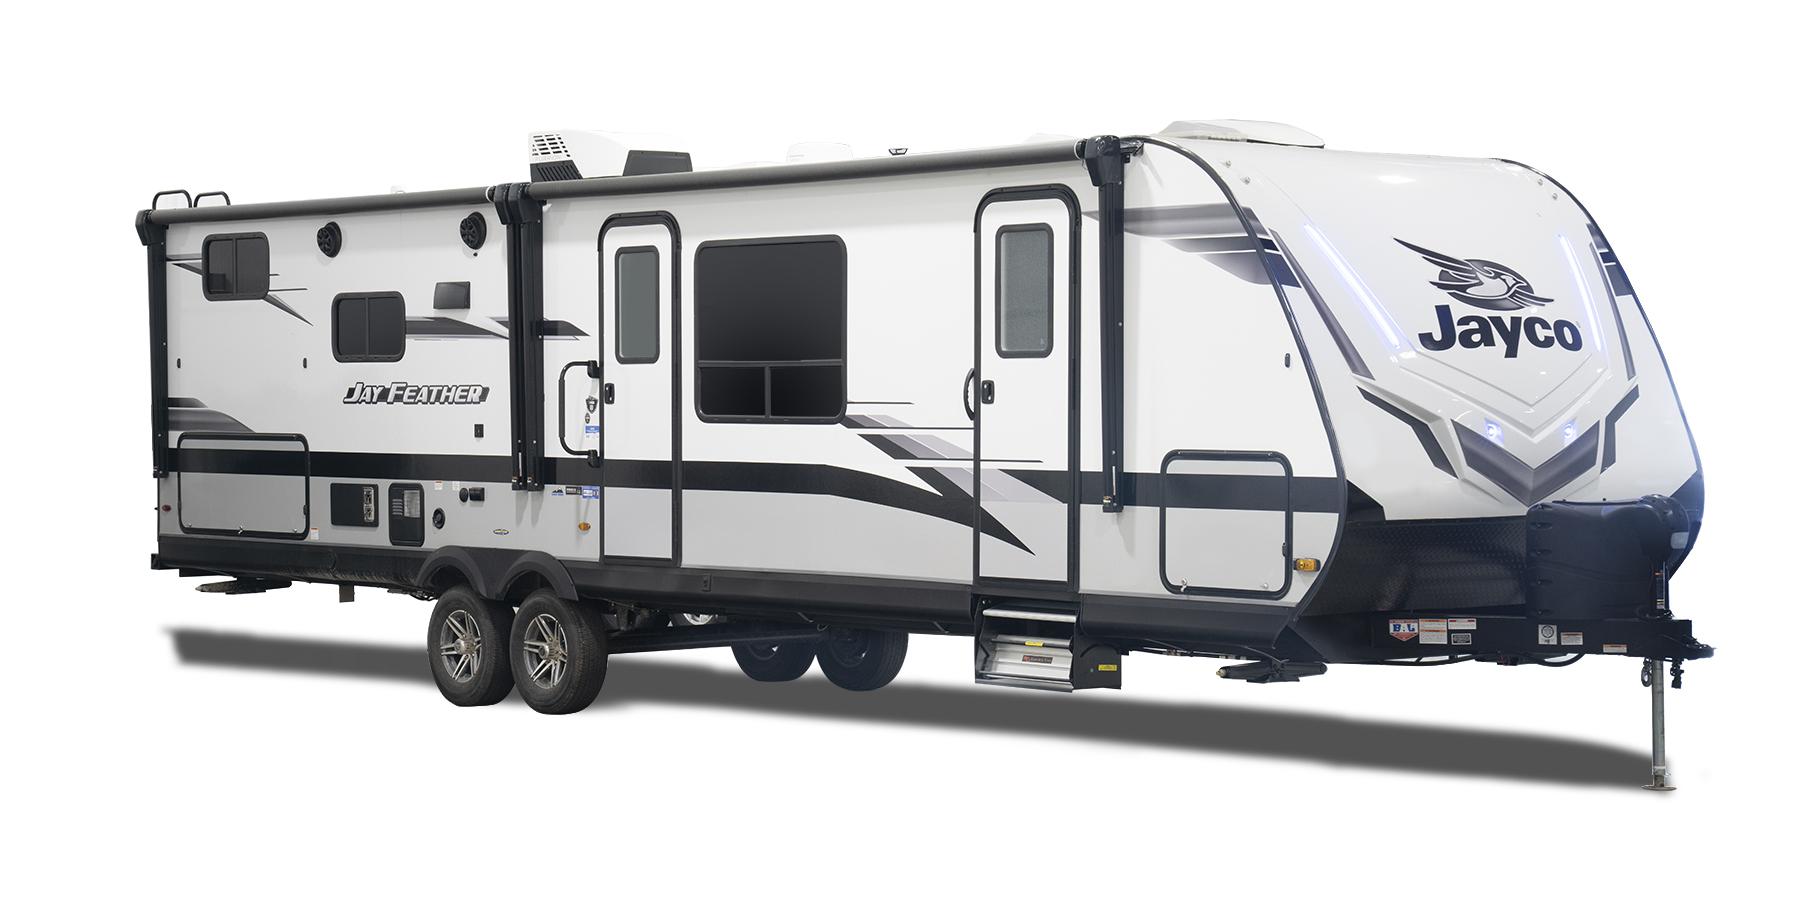 are jayco travel trailers good quality